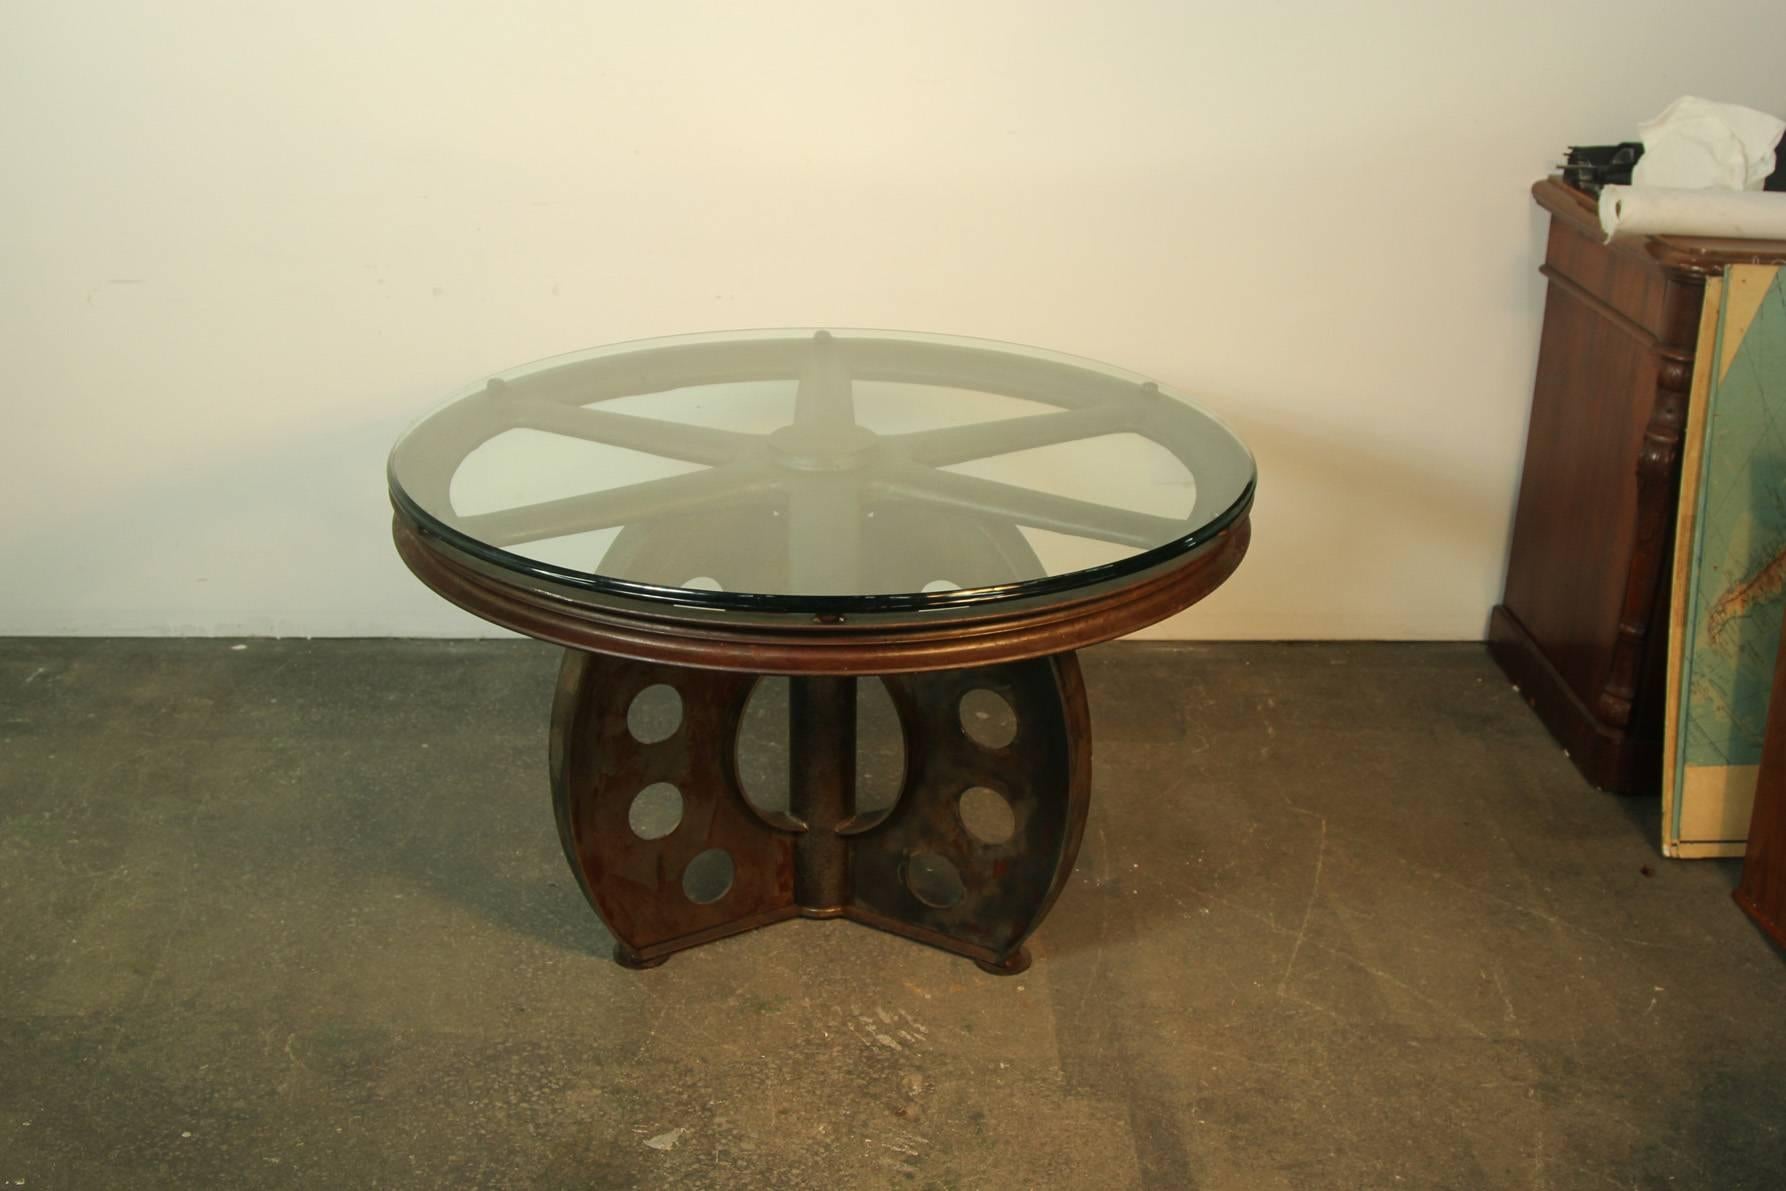 19th Century Impressive Iron Table Desk from Old Industrial Wheel For Sale